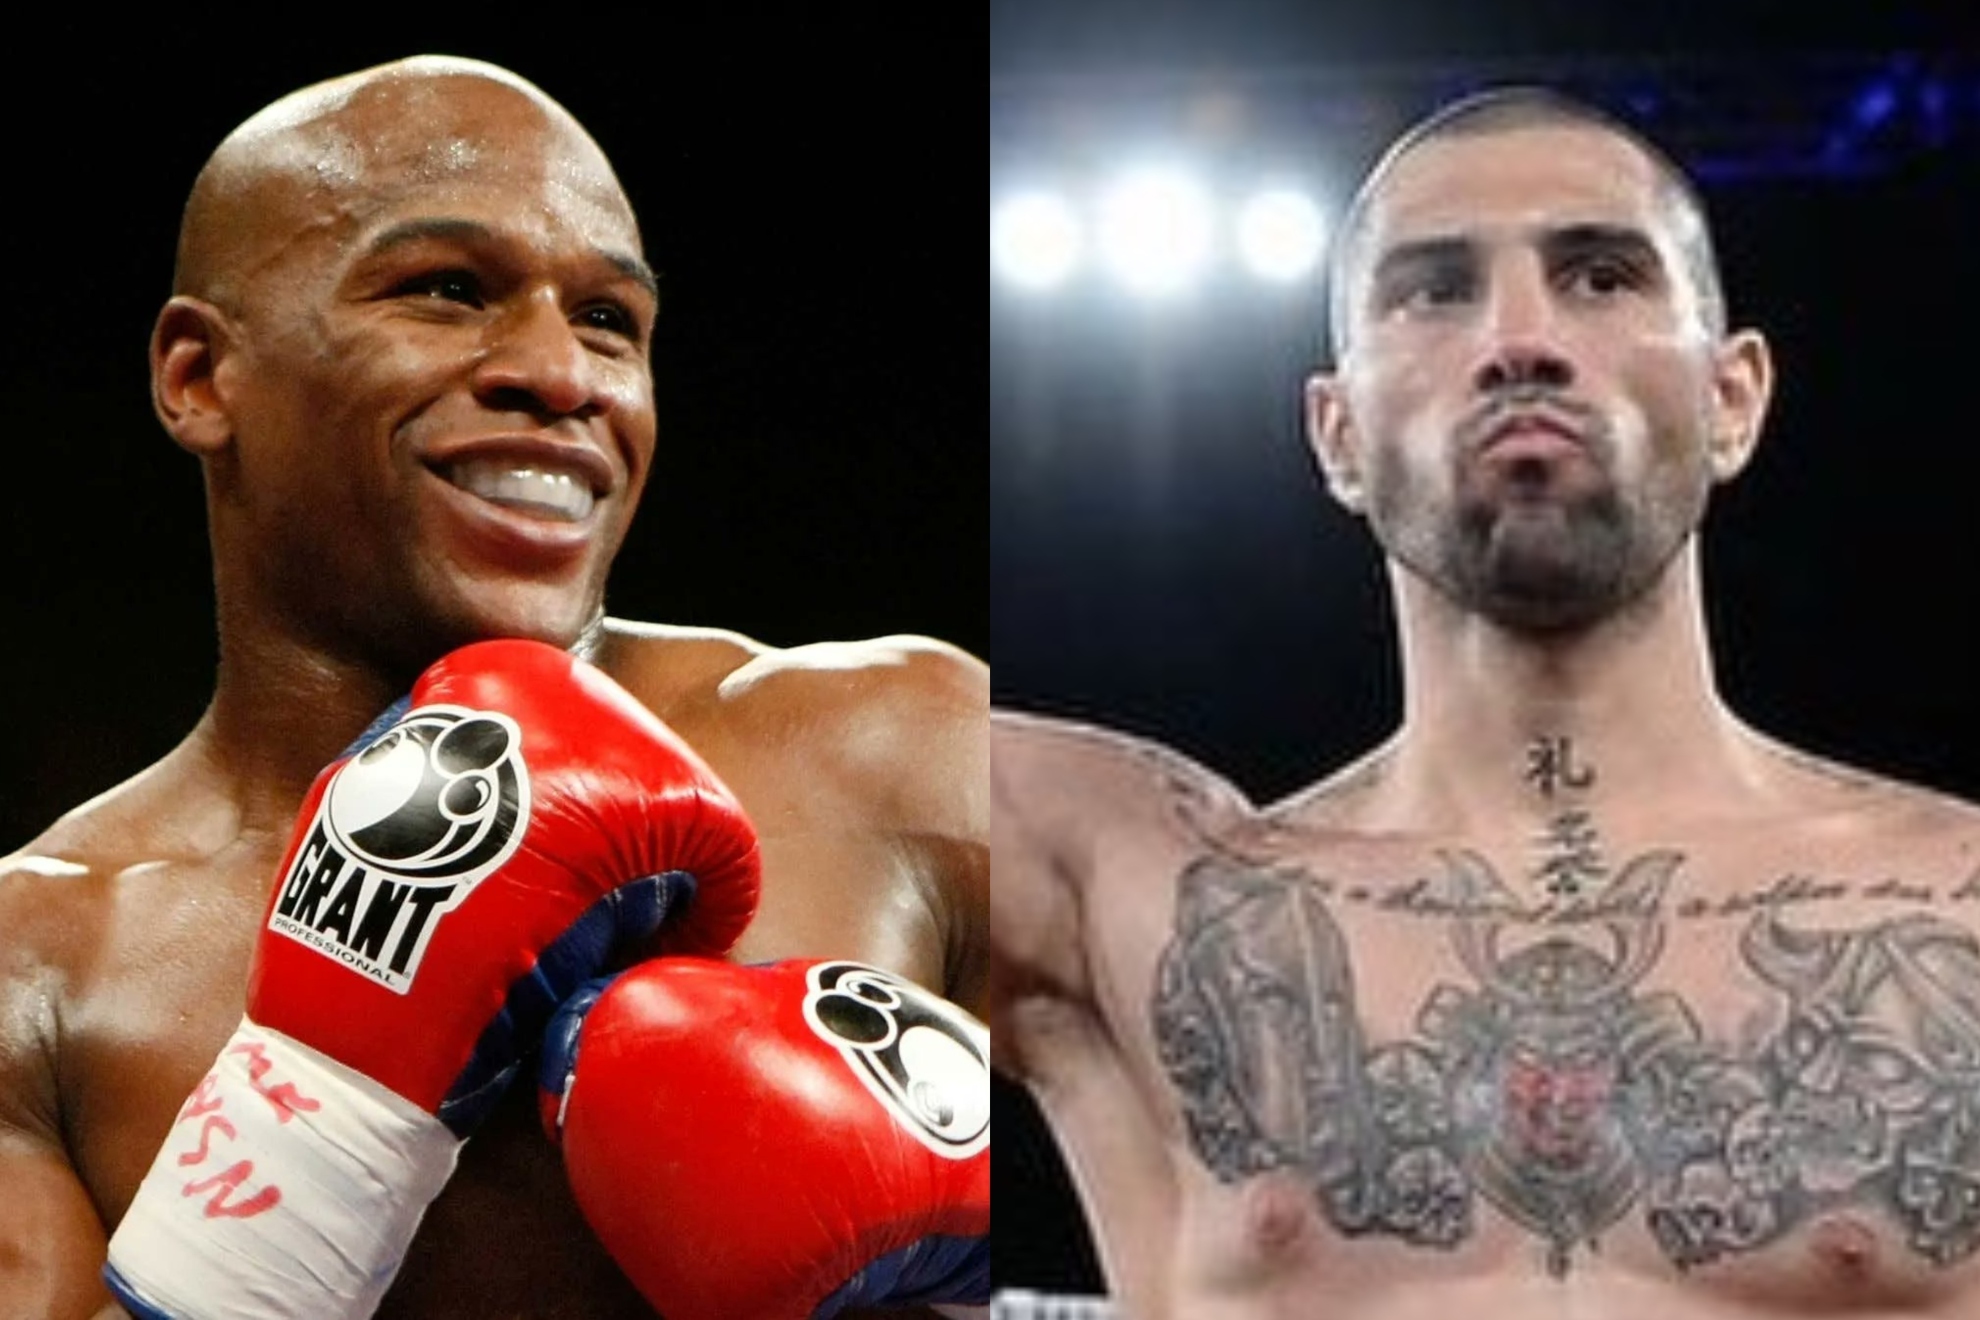 Mayweather Jr. faces off against Gotti family heir in highly-anticipated exhibition bout